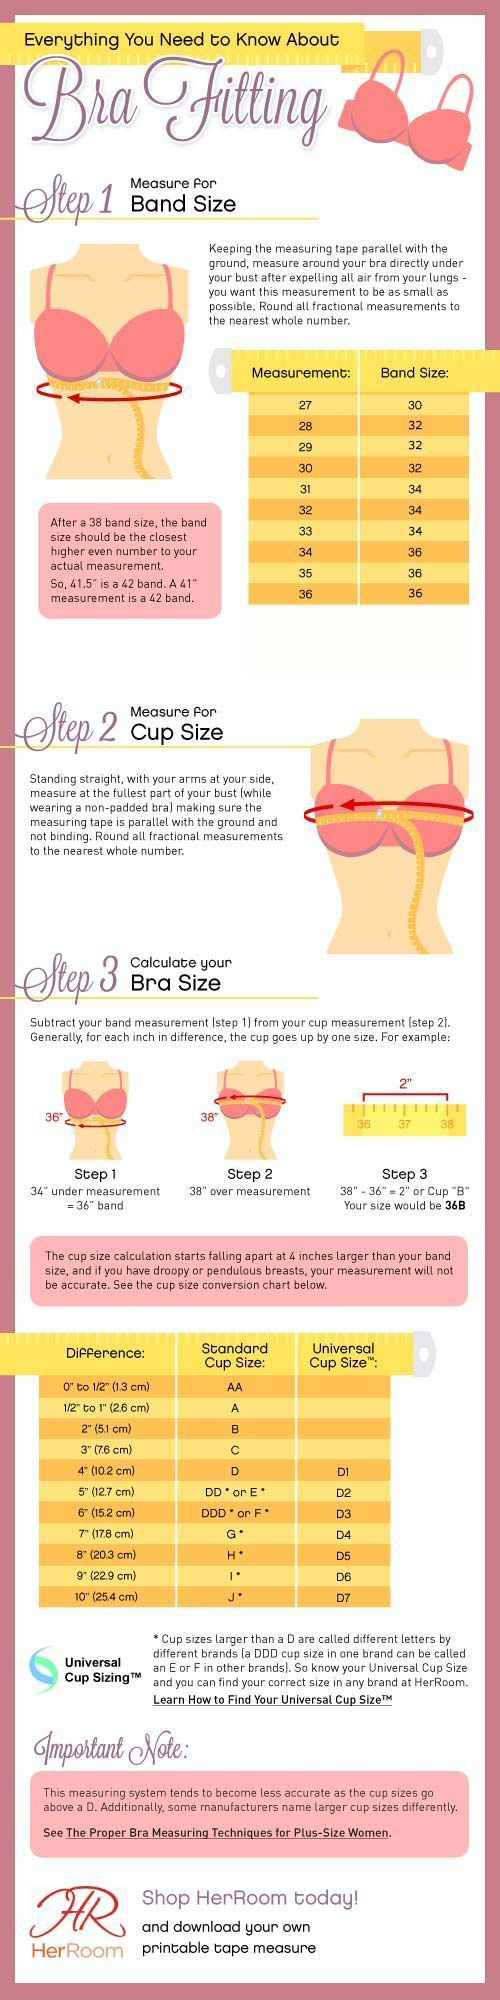 How to Choose the Right Bra for Your Size